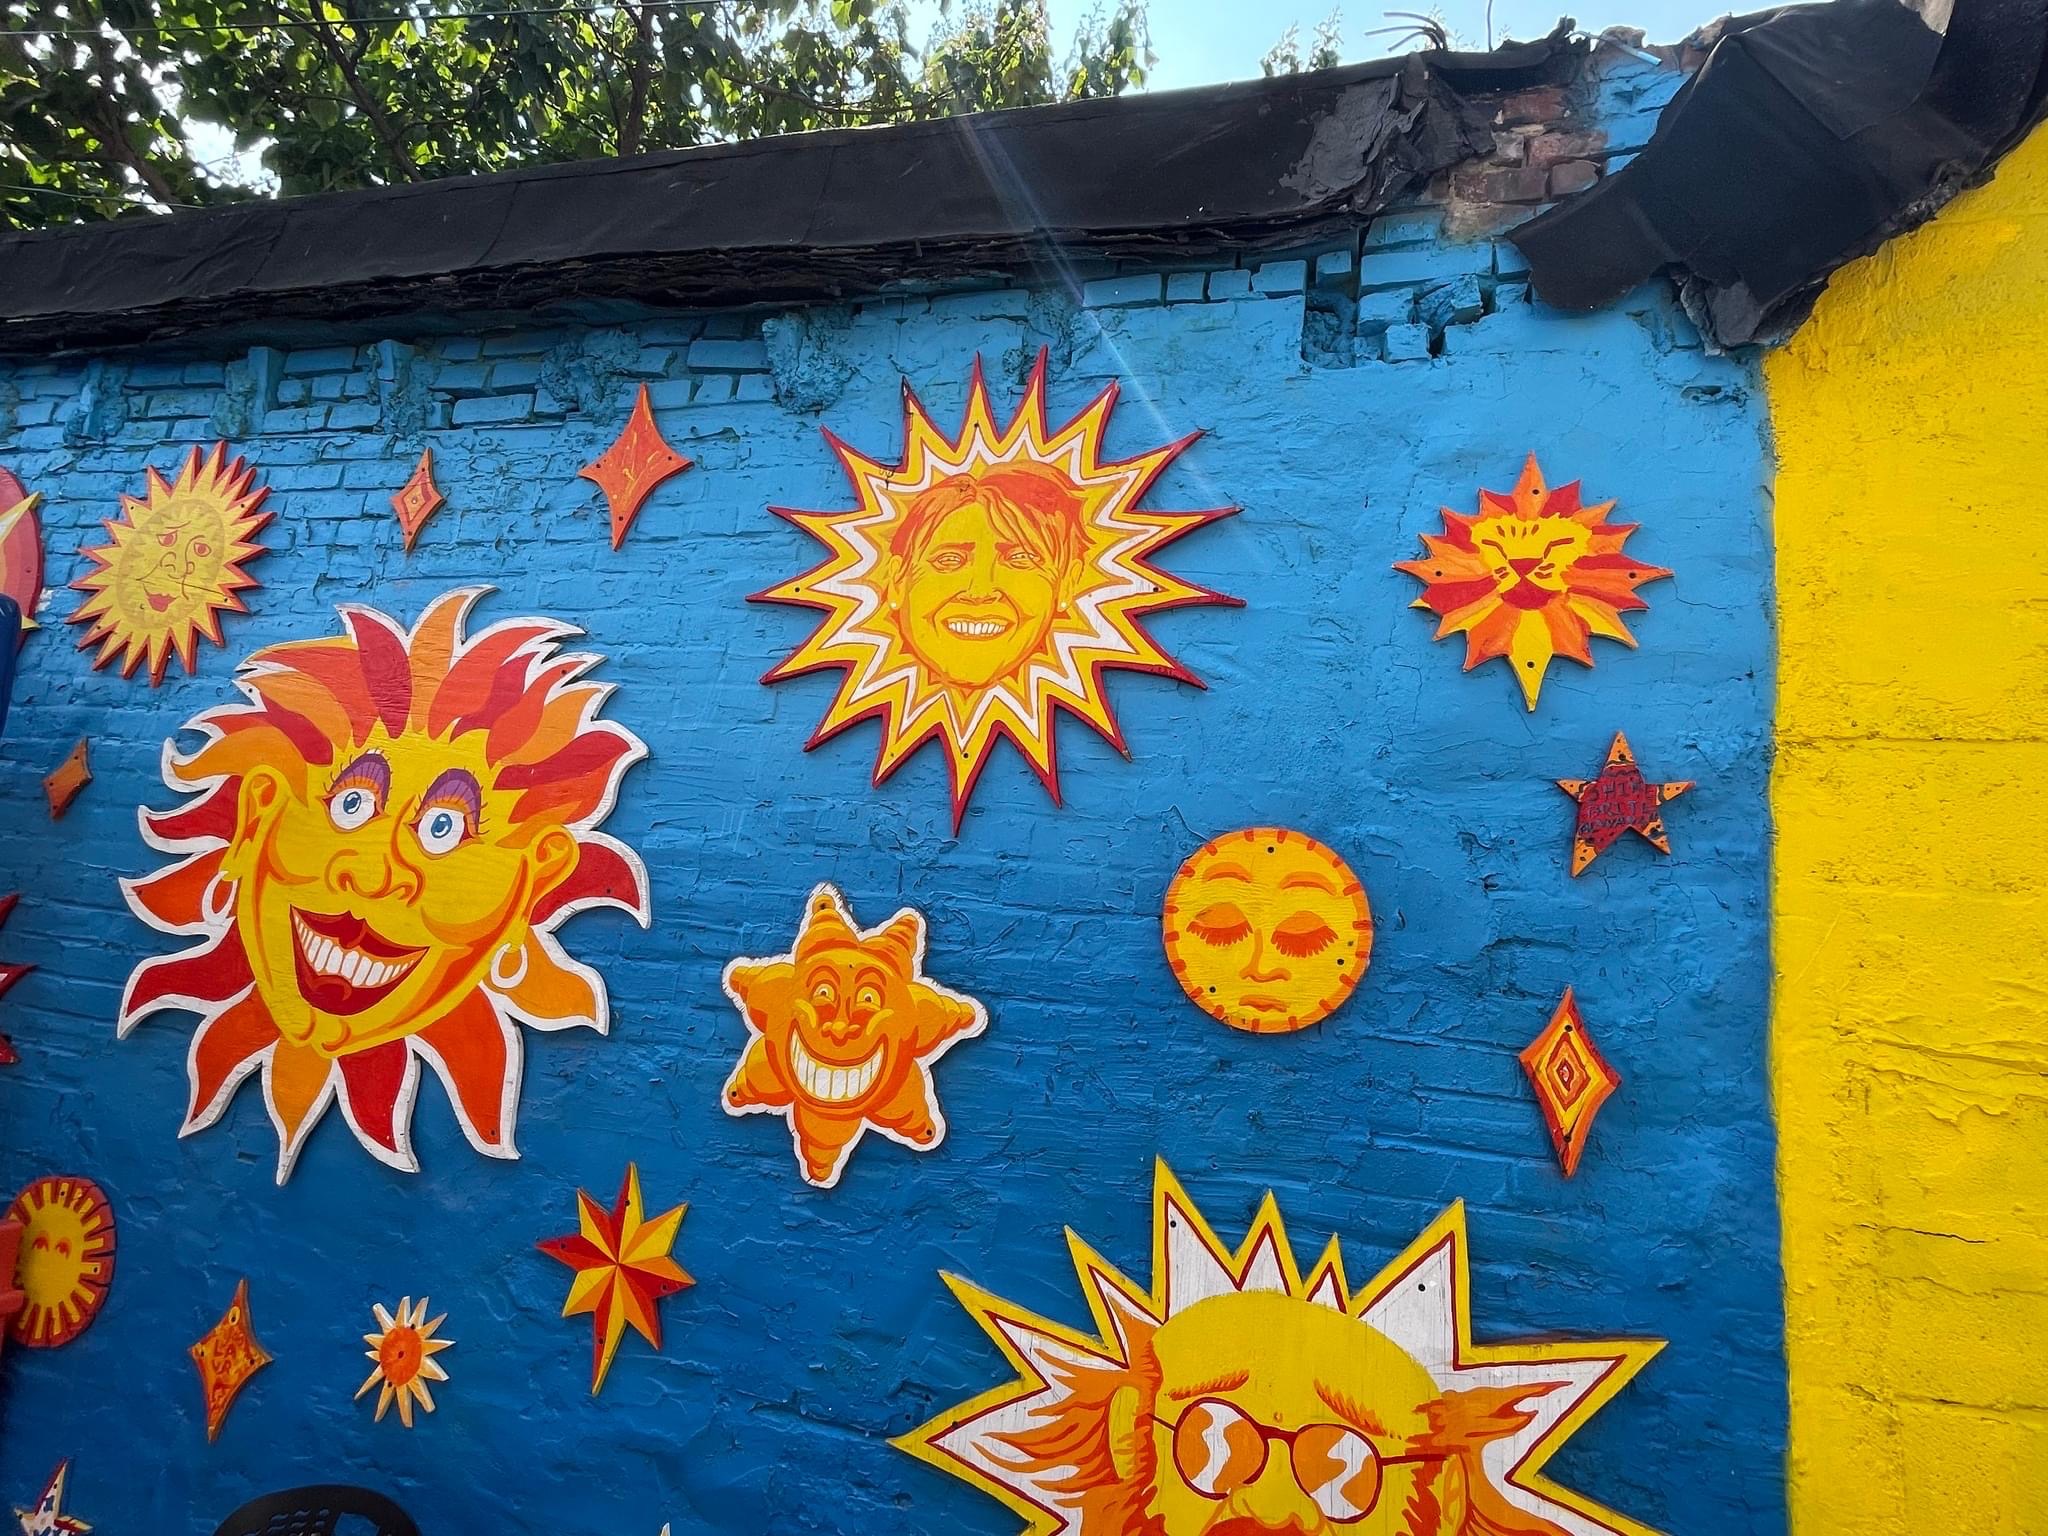 Suns with faces painted on them decorate a concrete wall